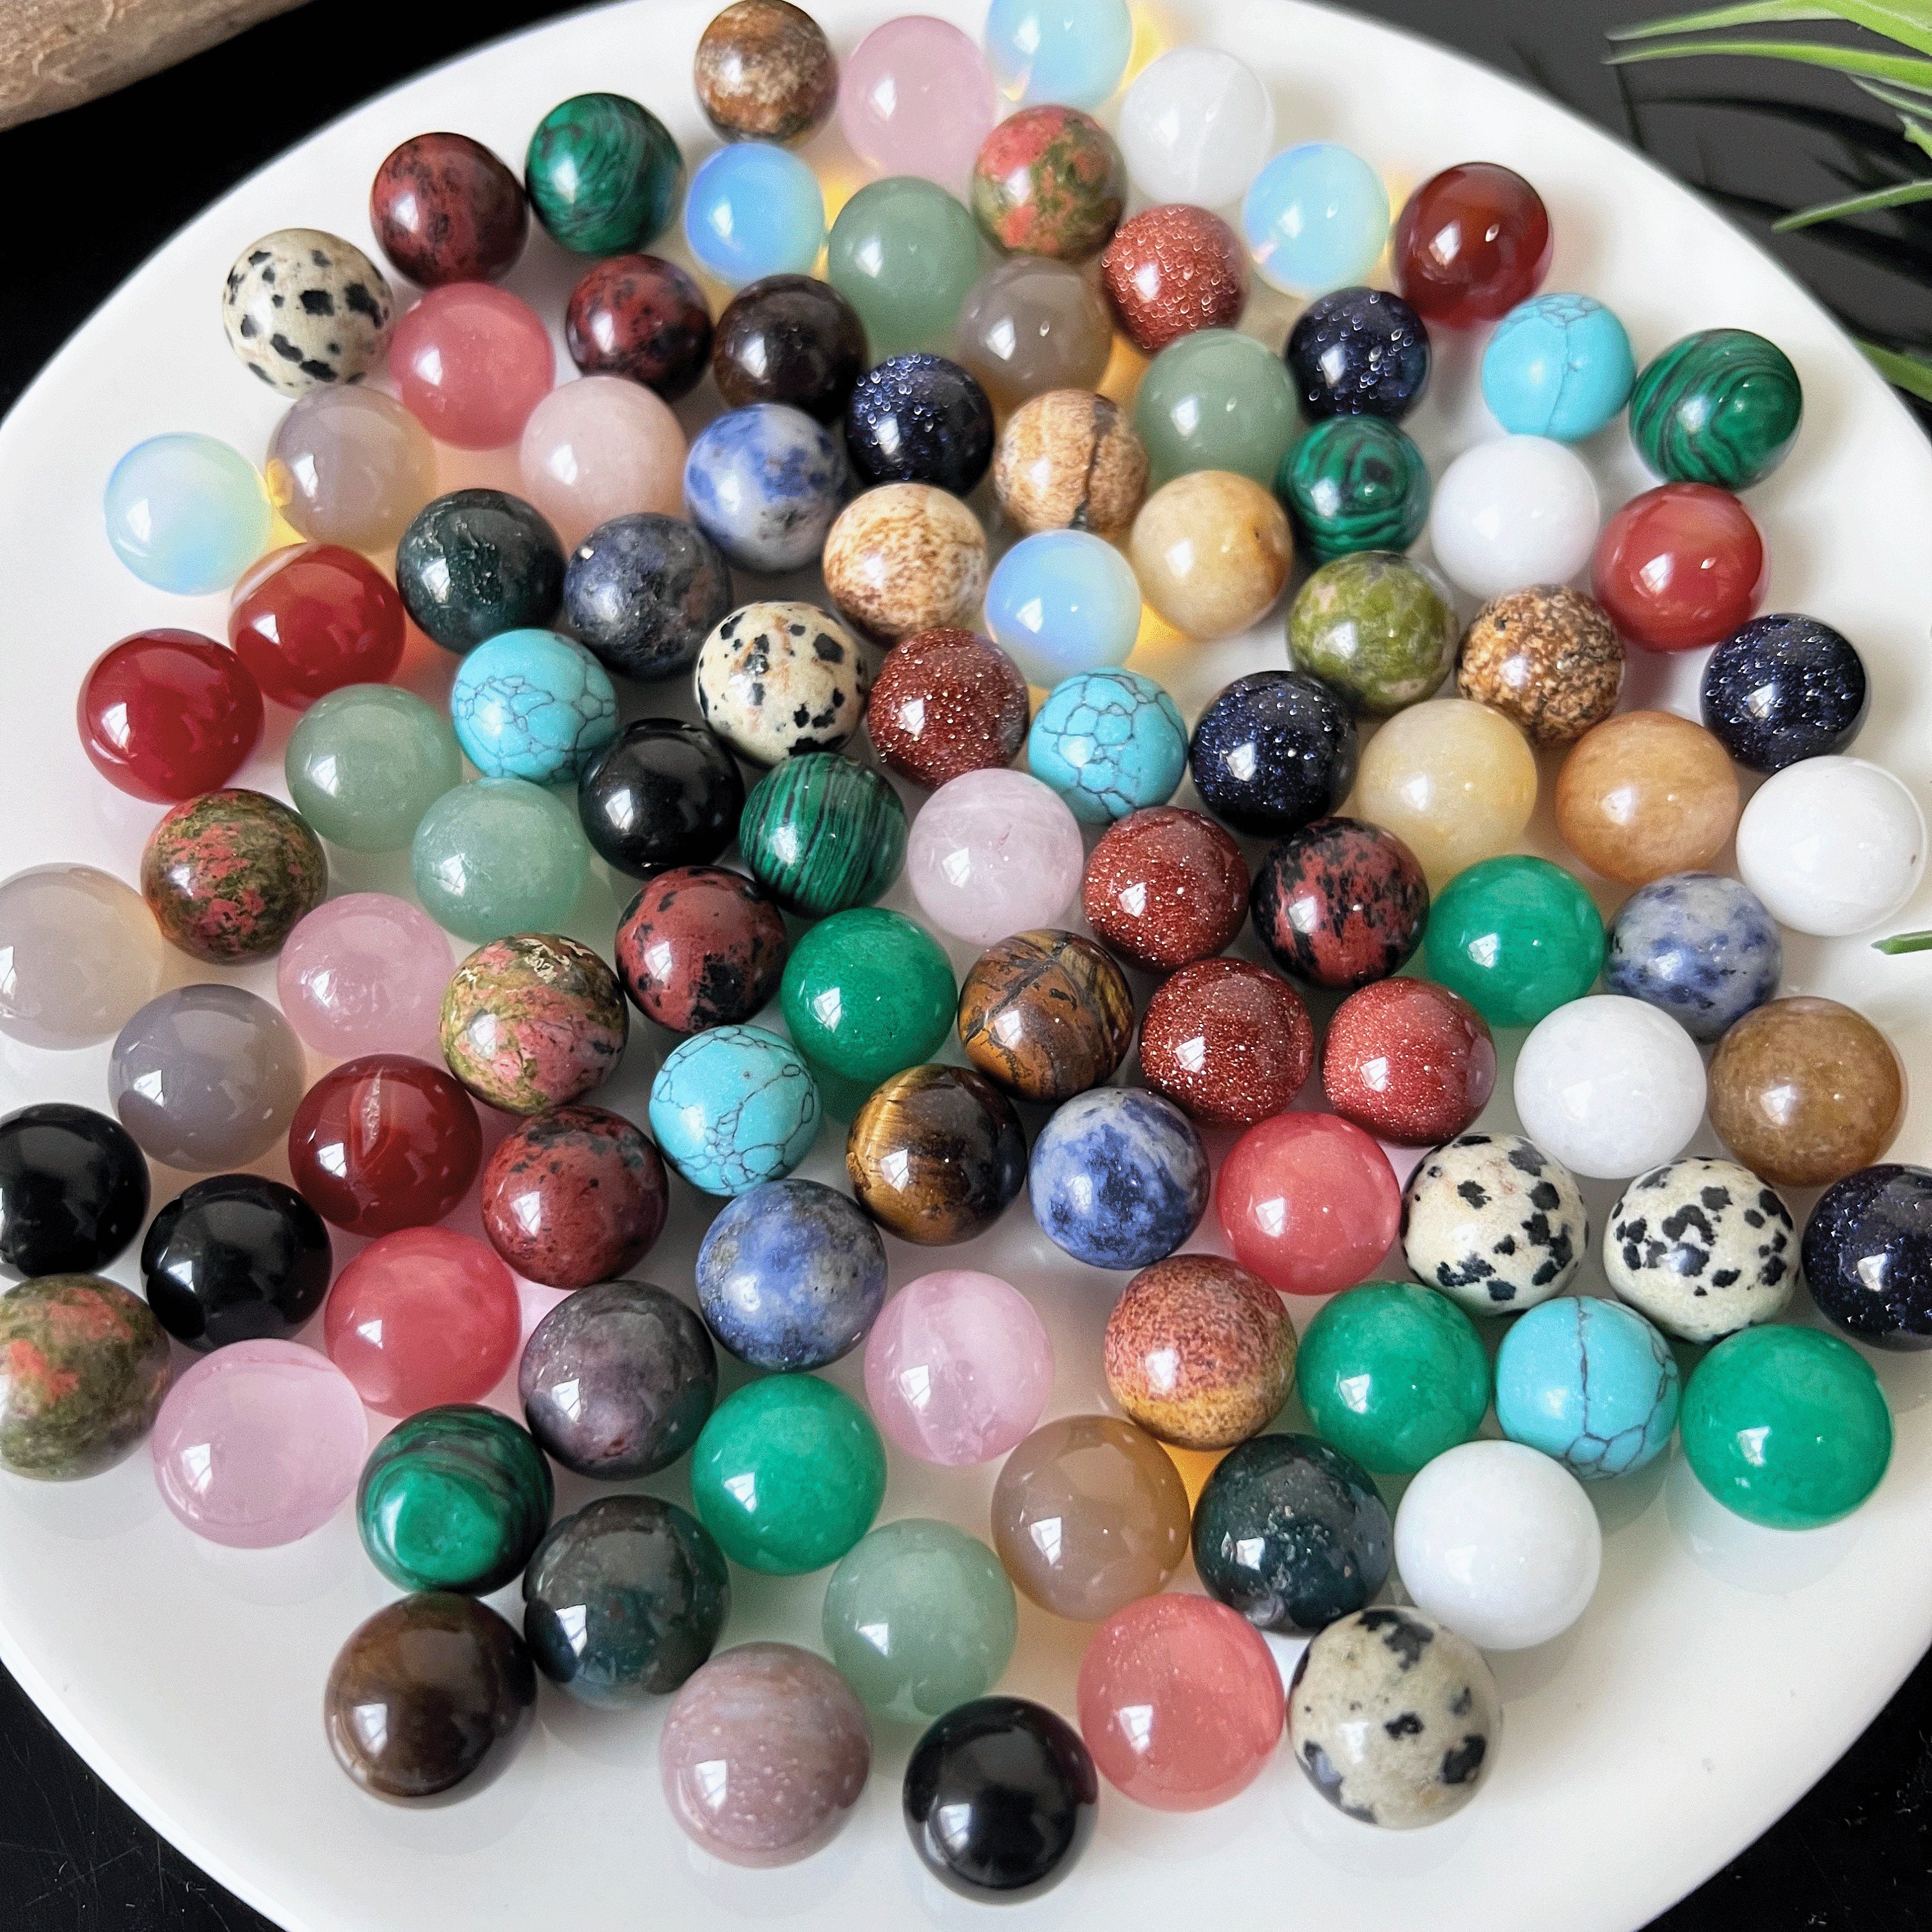 DM275 Round Beads Jewelry Resin Silikonform Crystal Sphere Ball